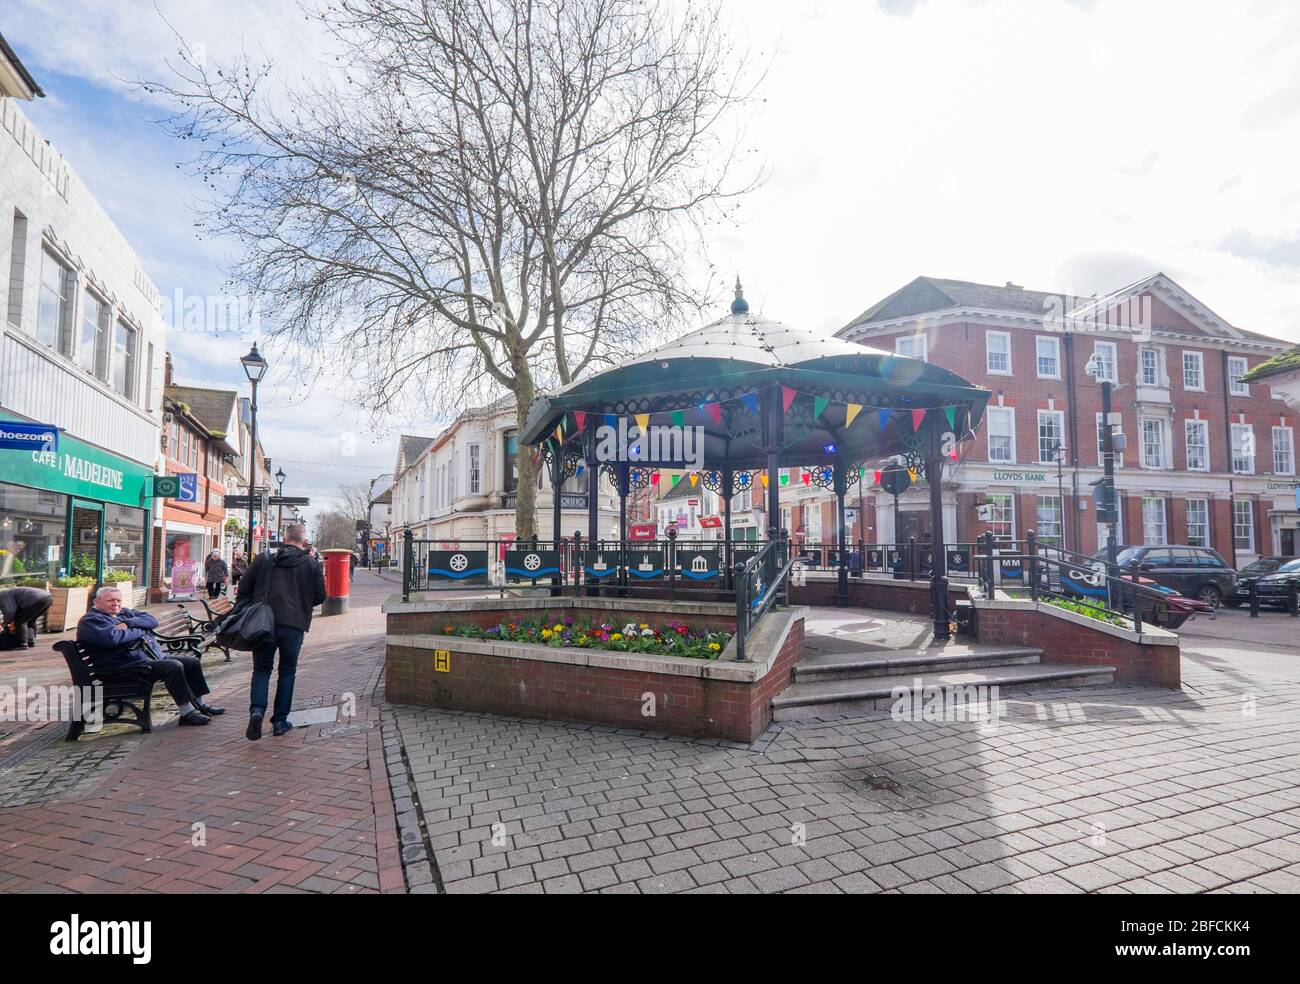 Ashford, Kent, United Kingdom - March 9, 2020: Rotunda on High Street in the pedestrianised town centre with shops in Spring Stock Photo